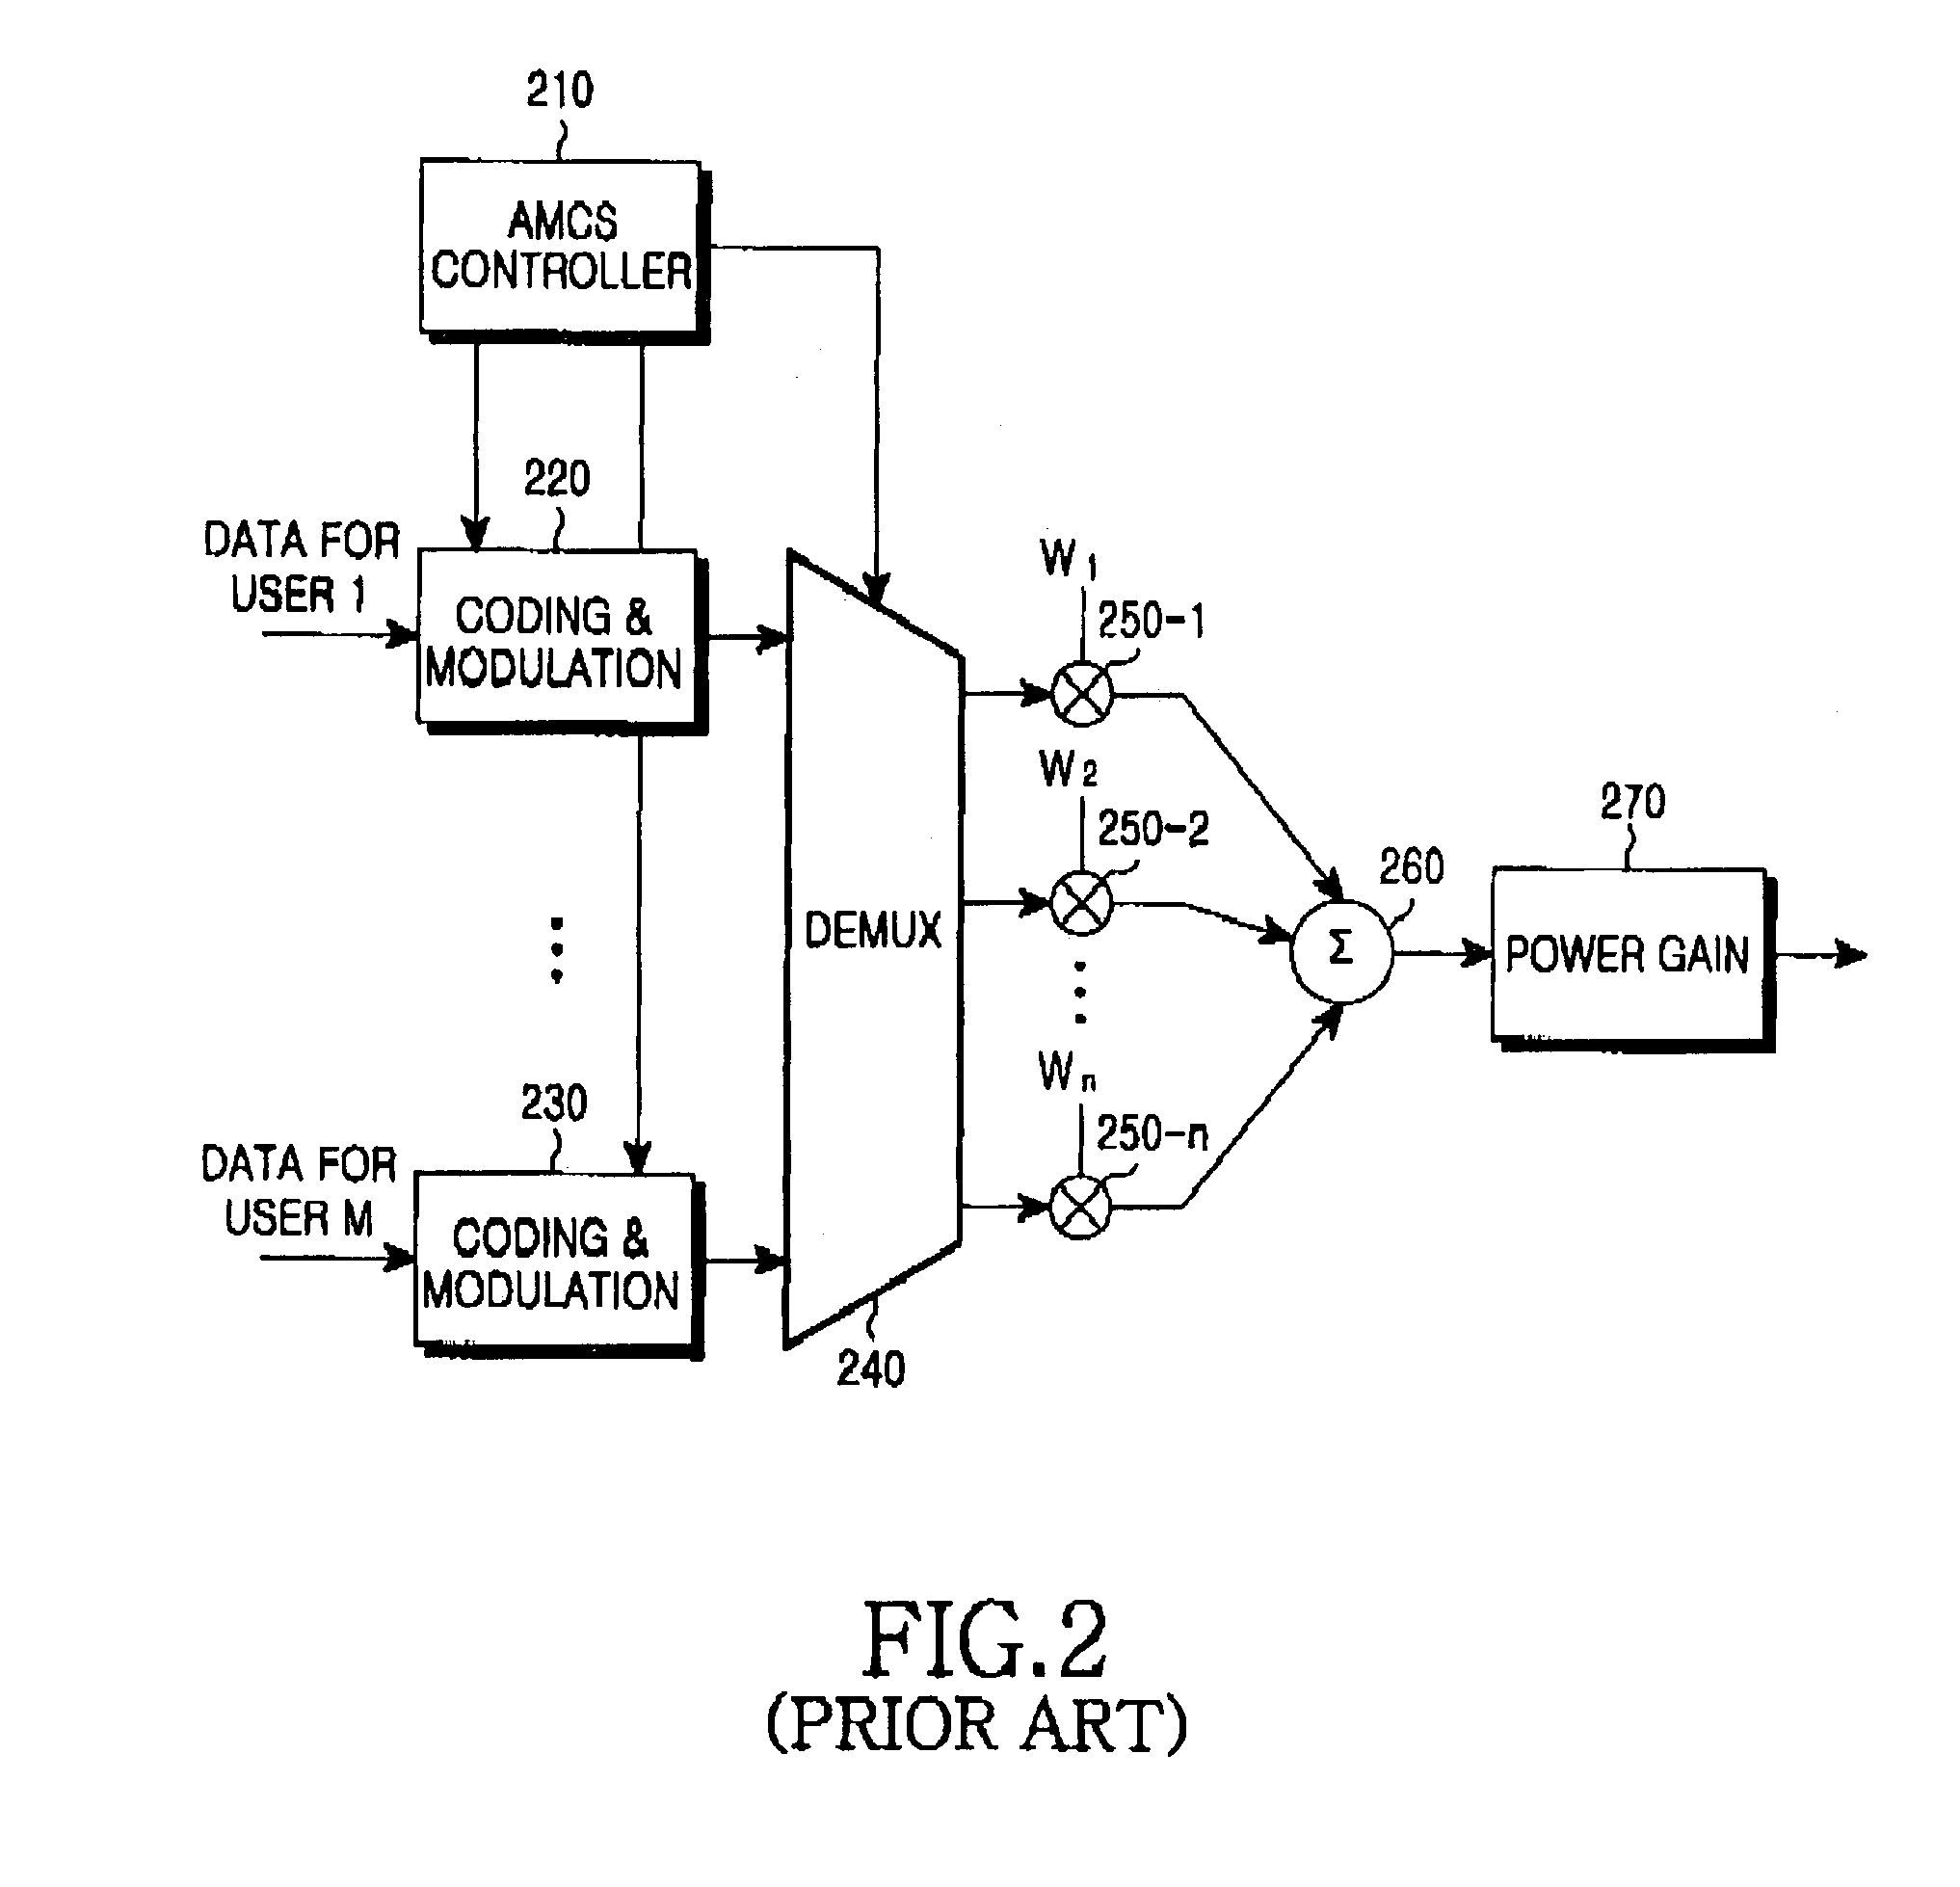 Apparatus and method for distributing power in an HSDPA system